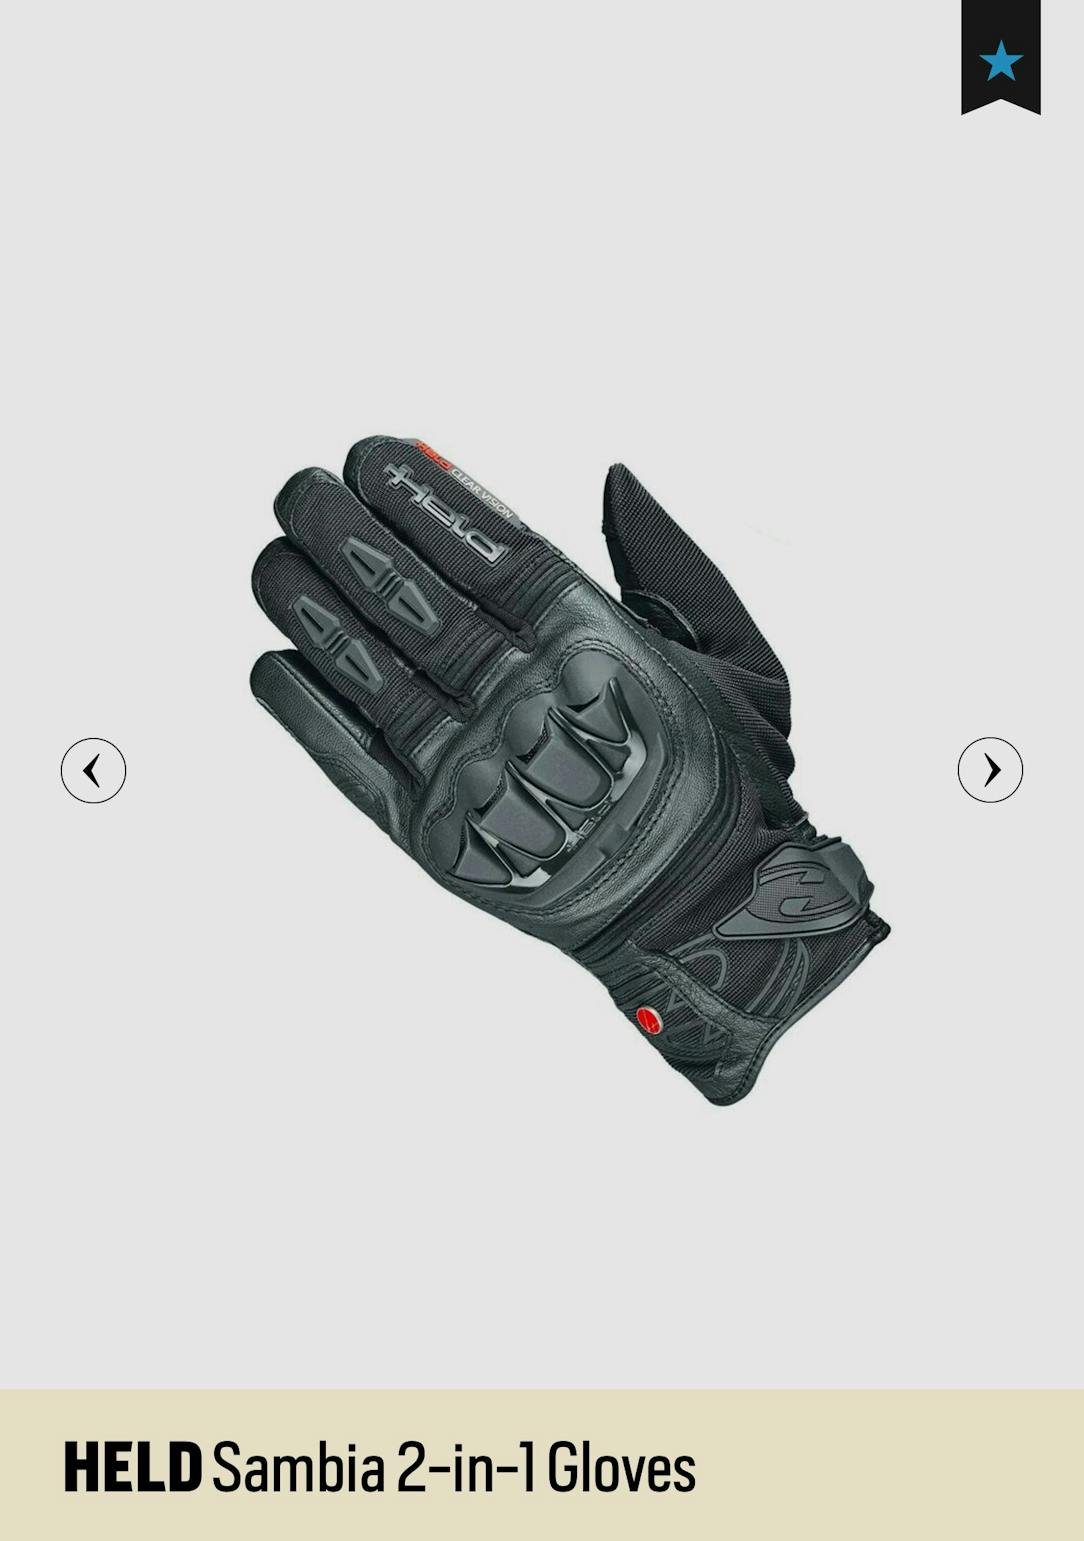 Best Cold Weather ADV/Dual Sport Motorcycle Gloves